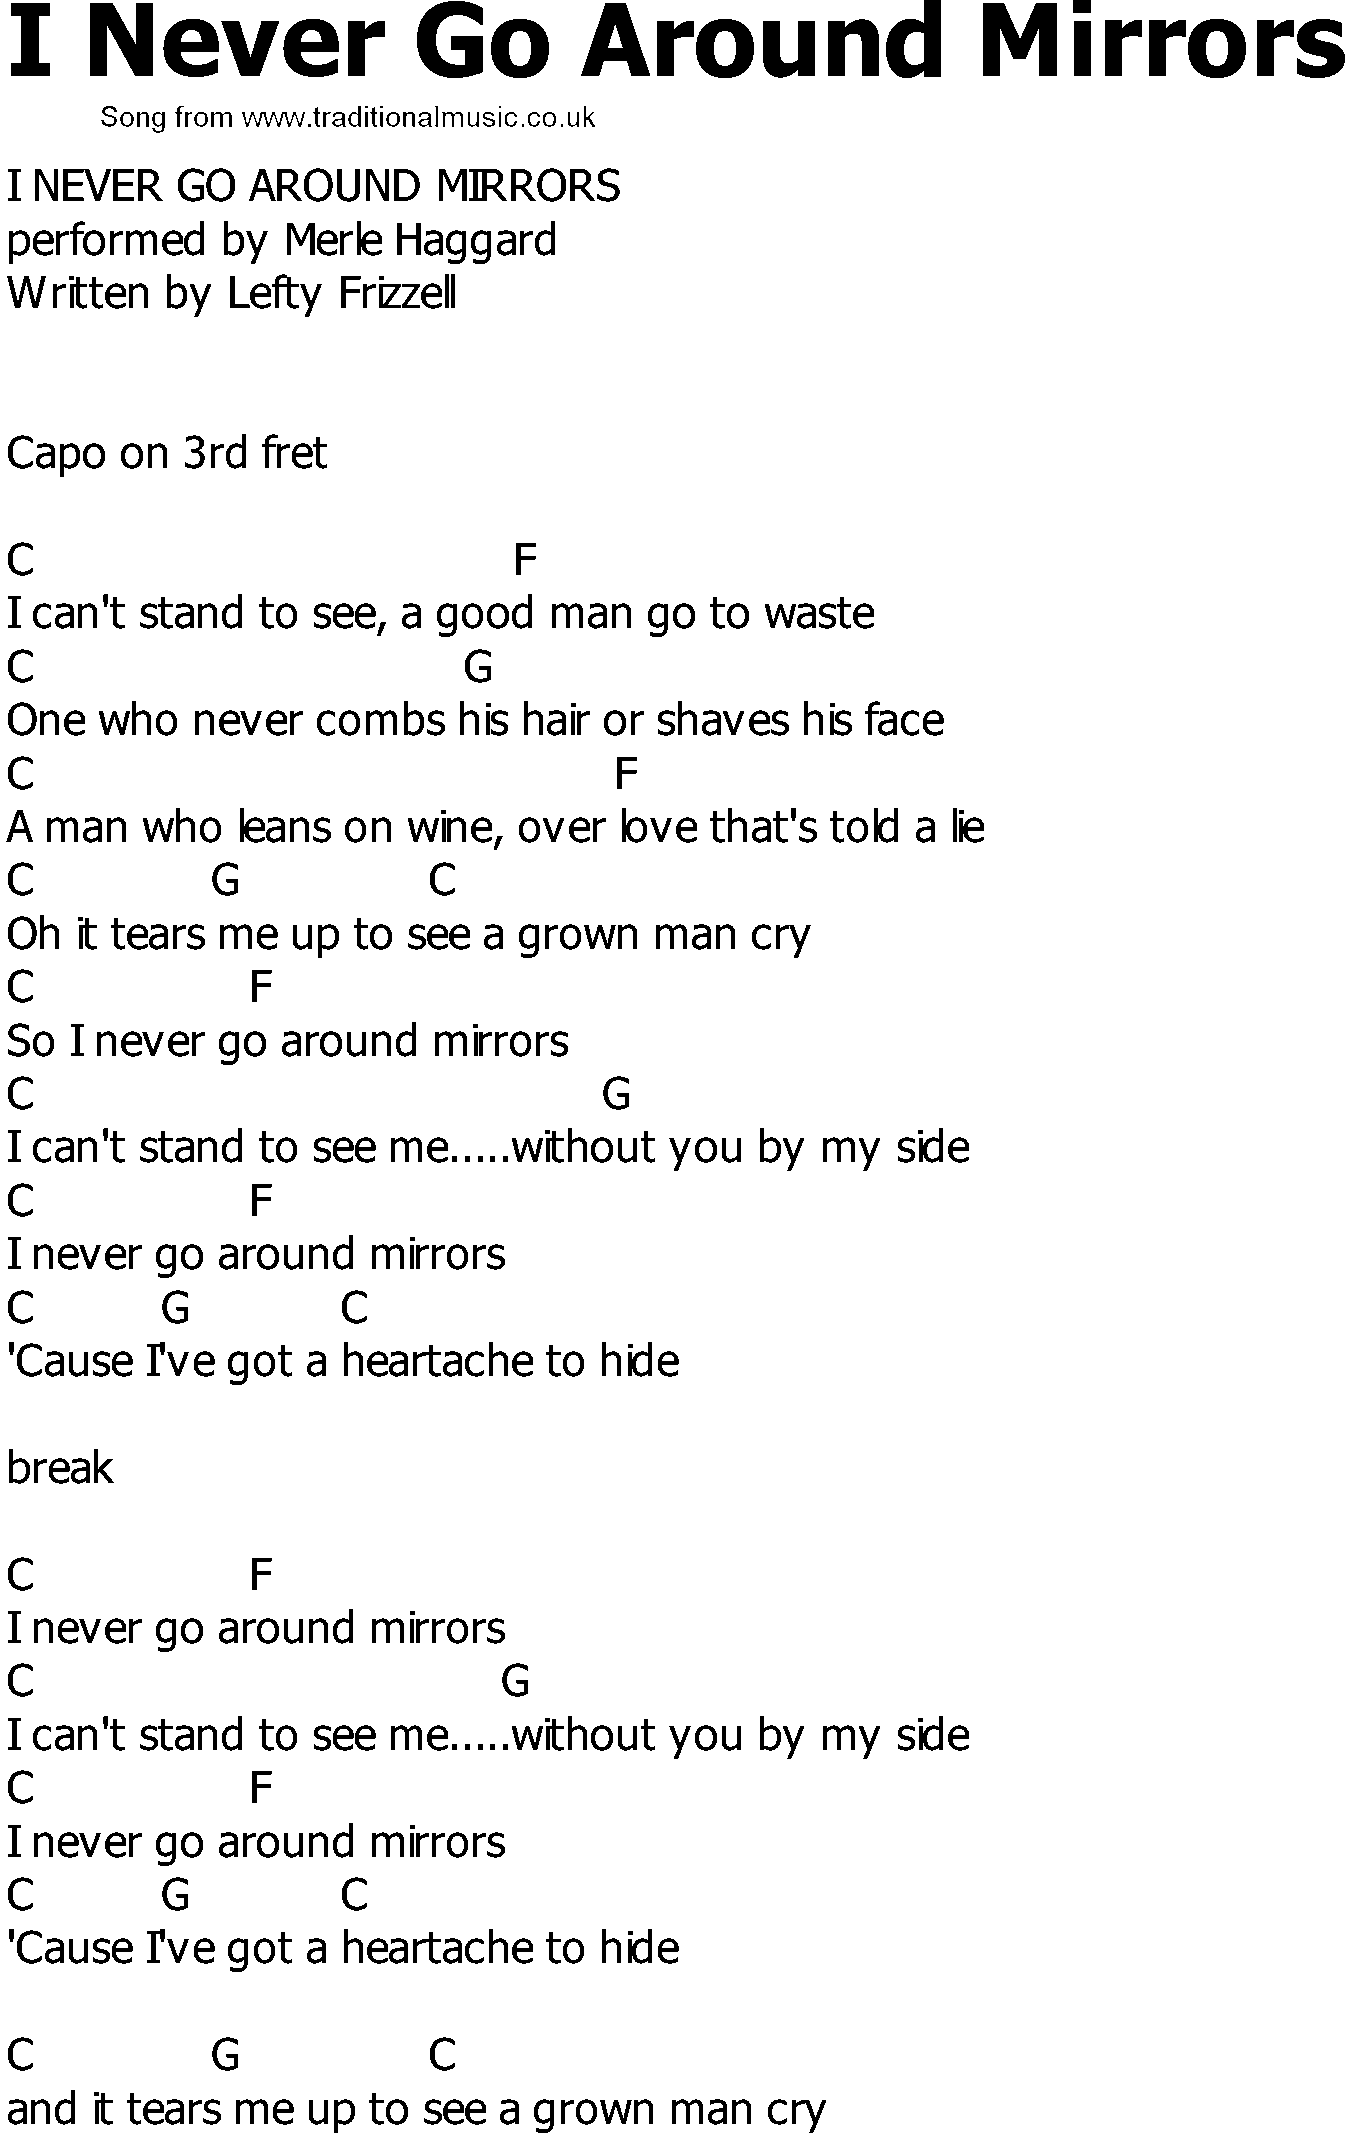 Old Country song lyrics with chords - I Never Go Around Mirrors